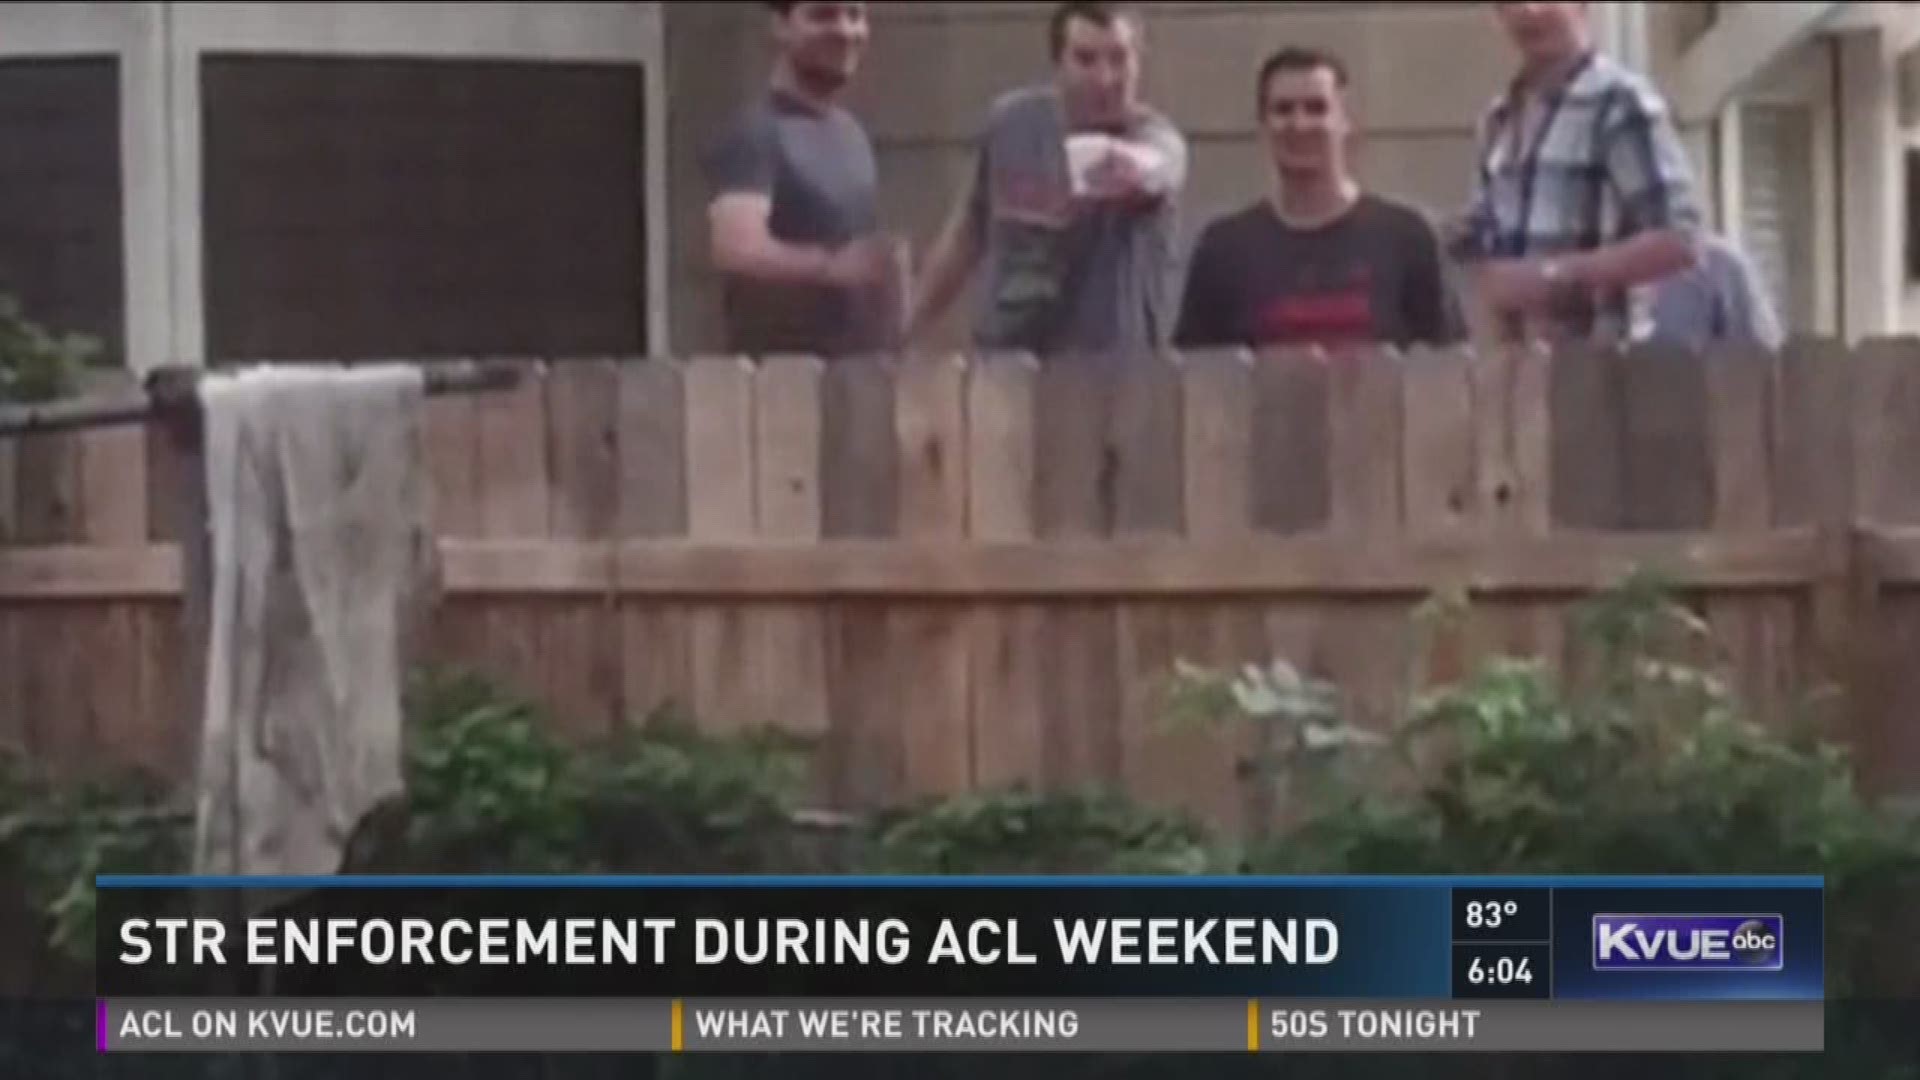 STR enforcement during ACL weekend